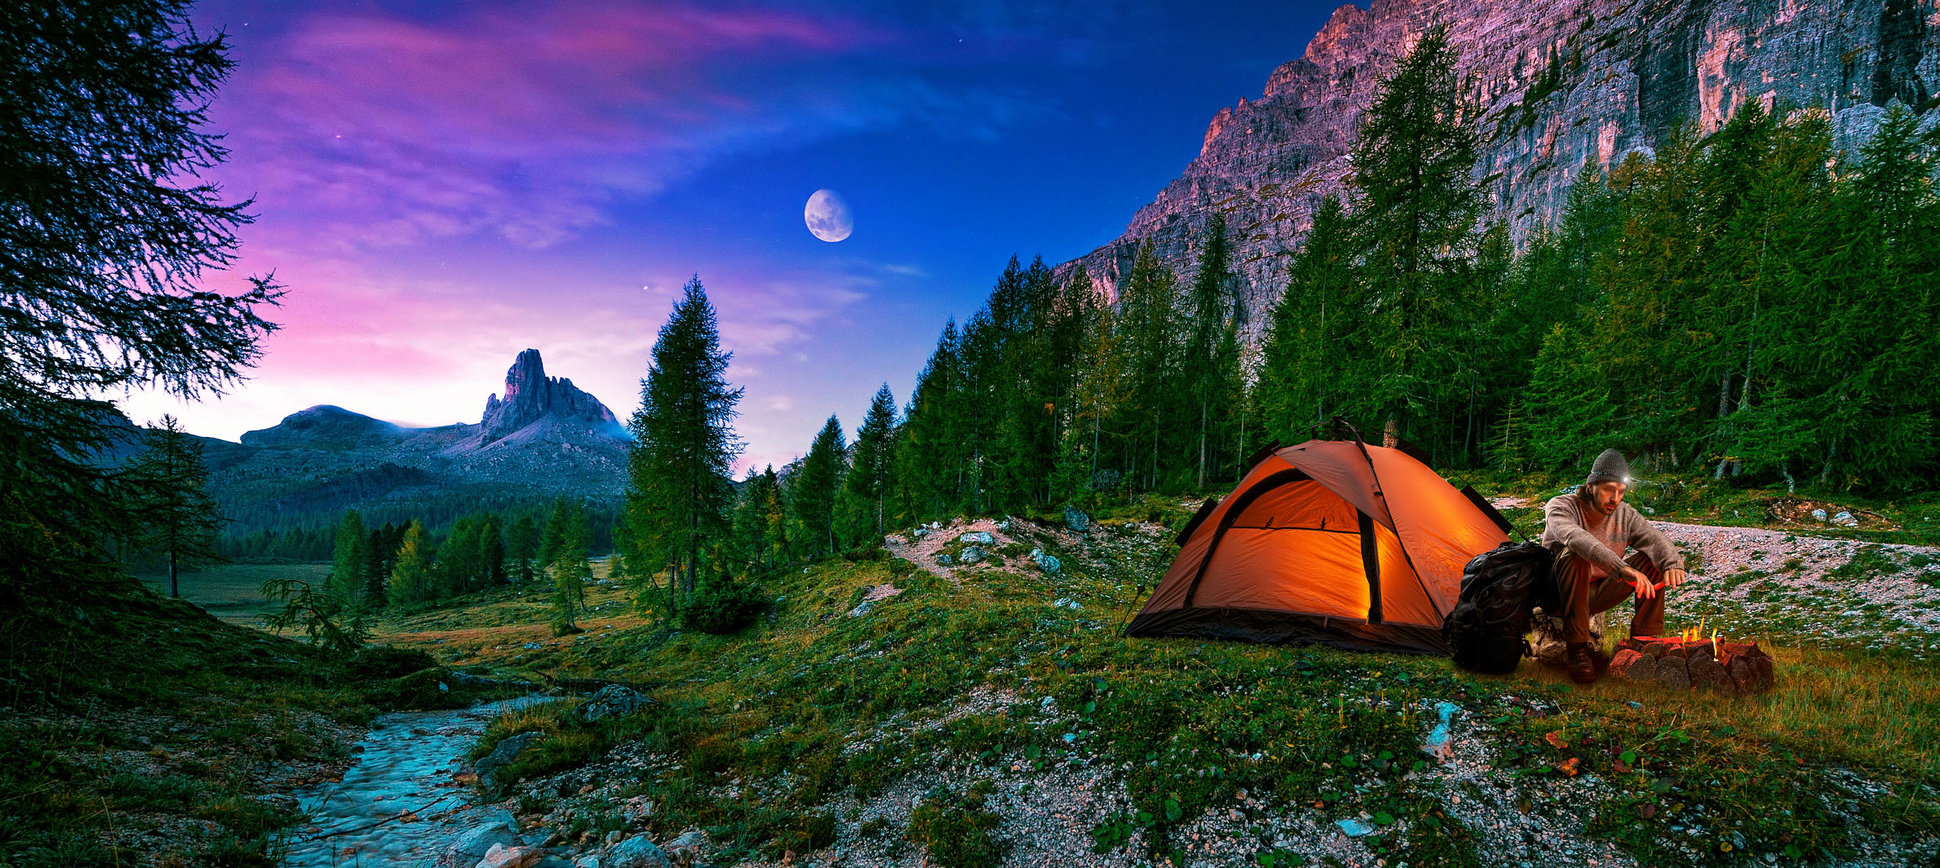 Find Your Purpose by Spending Time Outdoors Camping